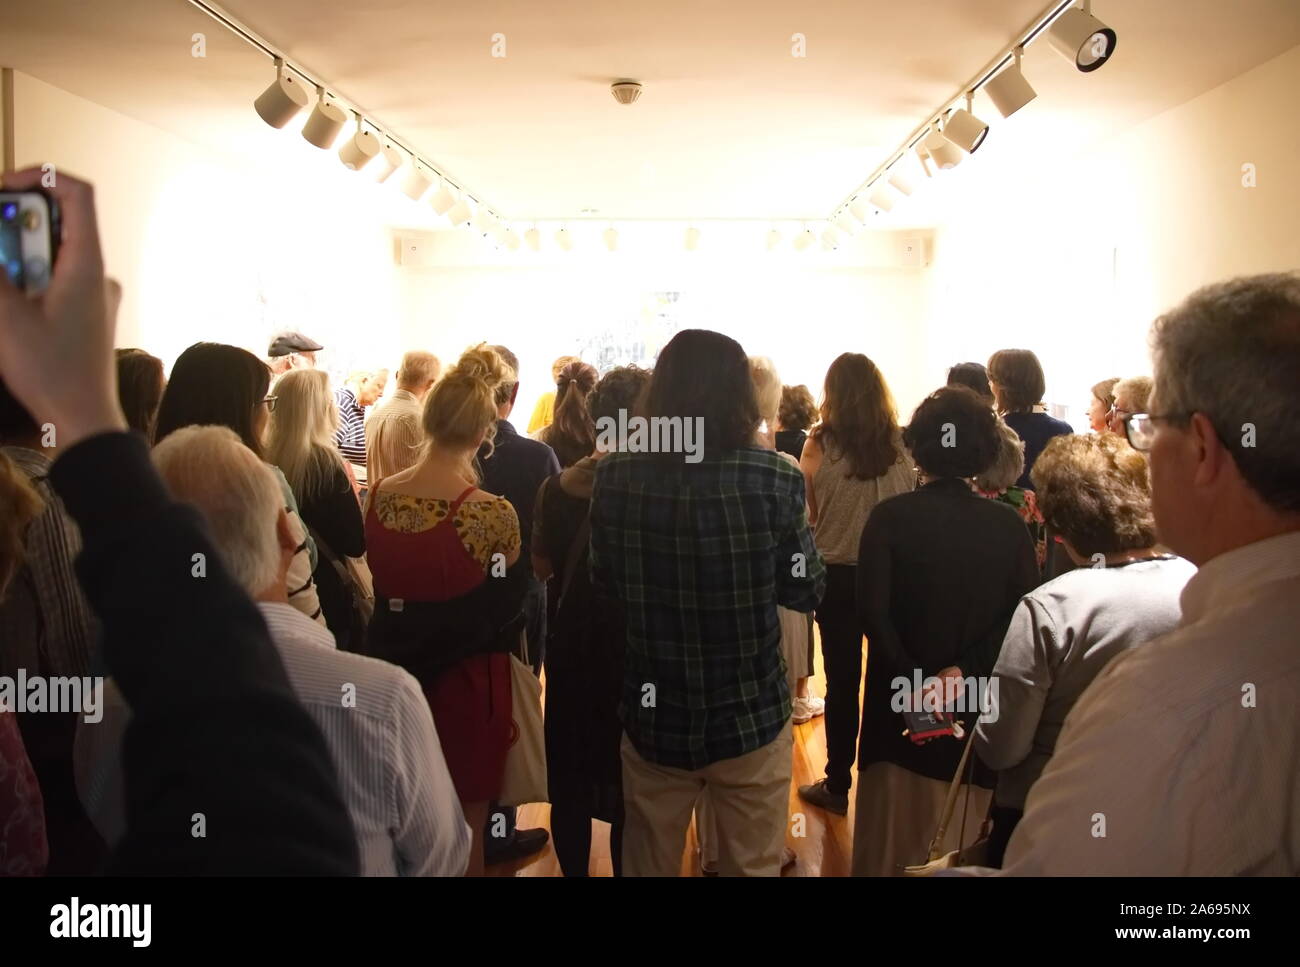 Middletown, CT / USA - September 20, 2017: Crowd of students and professors attending an artist talk at the Mansfield Freeman Center for East Asian St Stock Photo